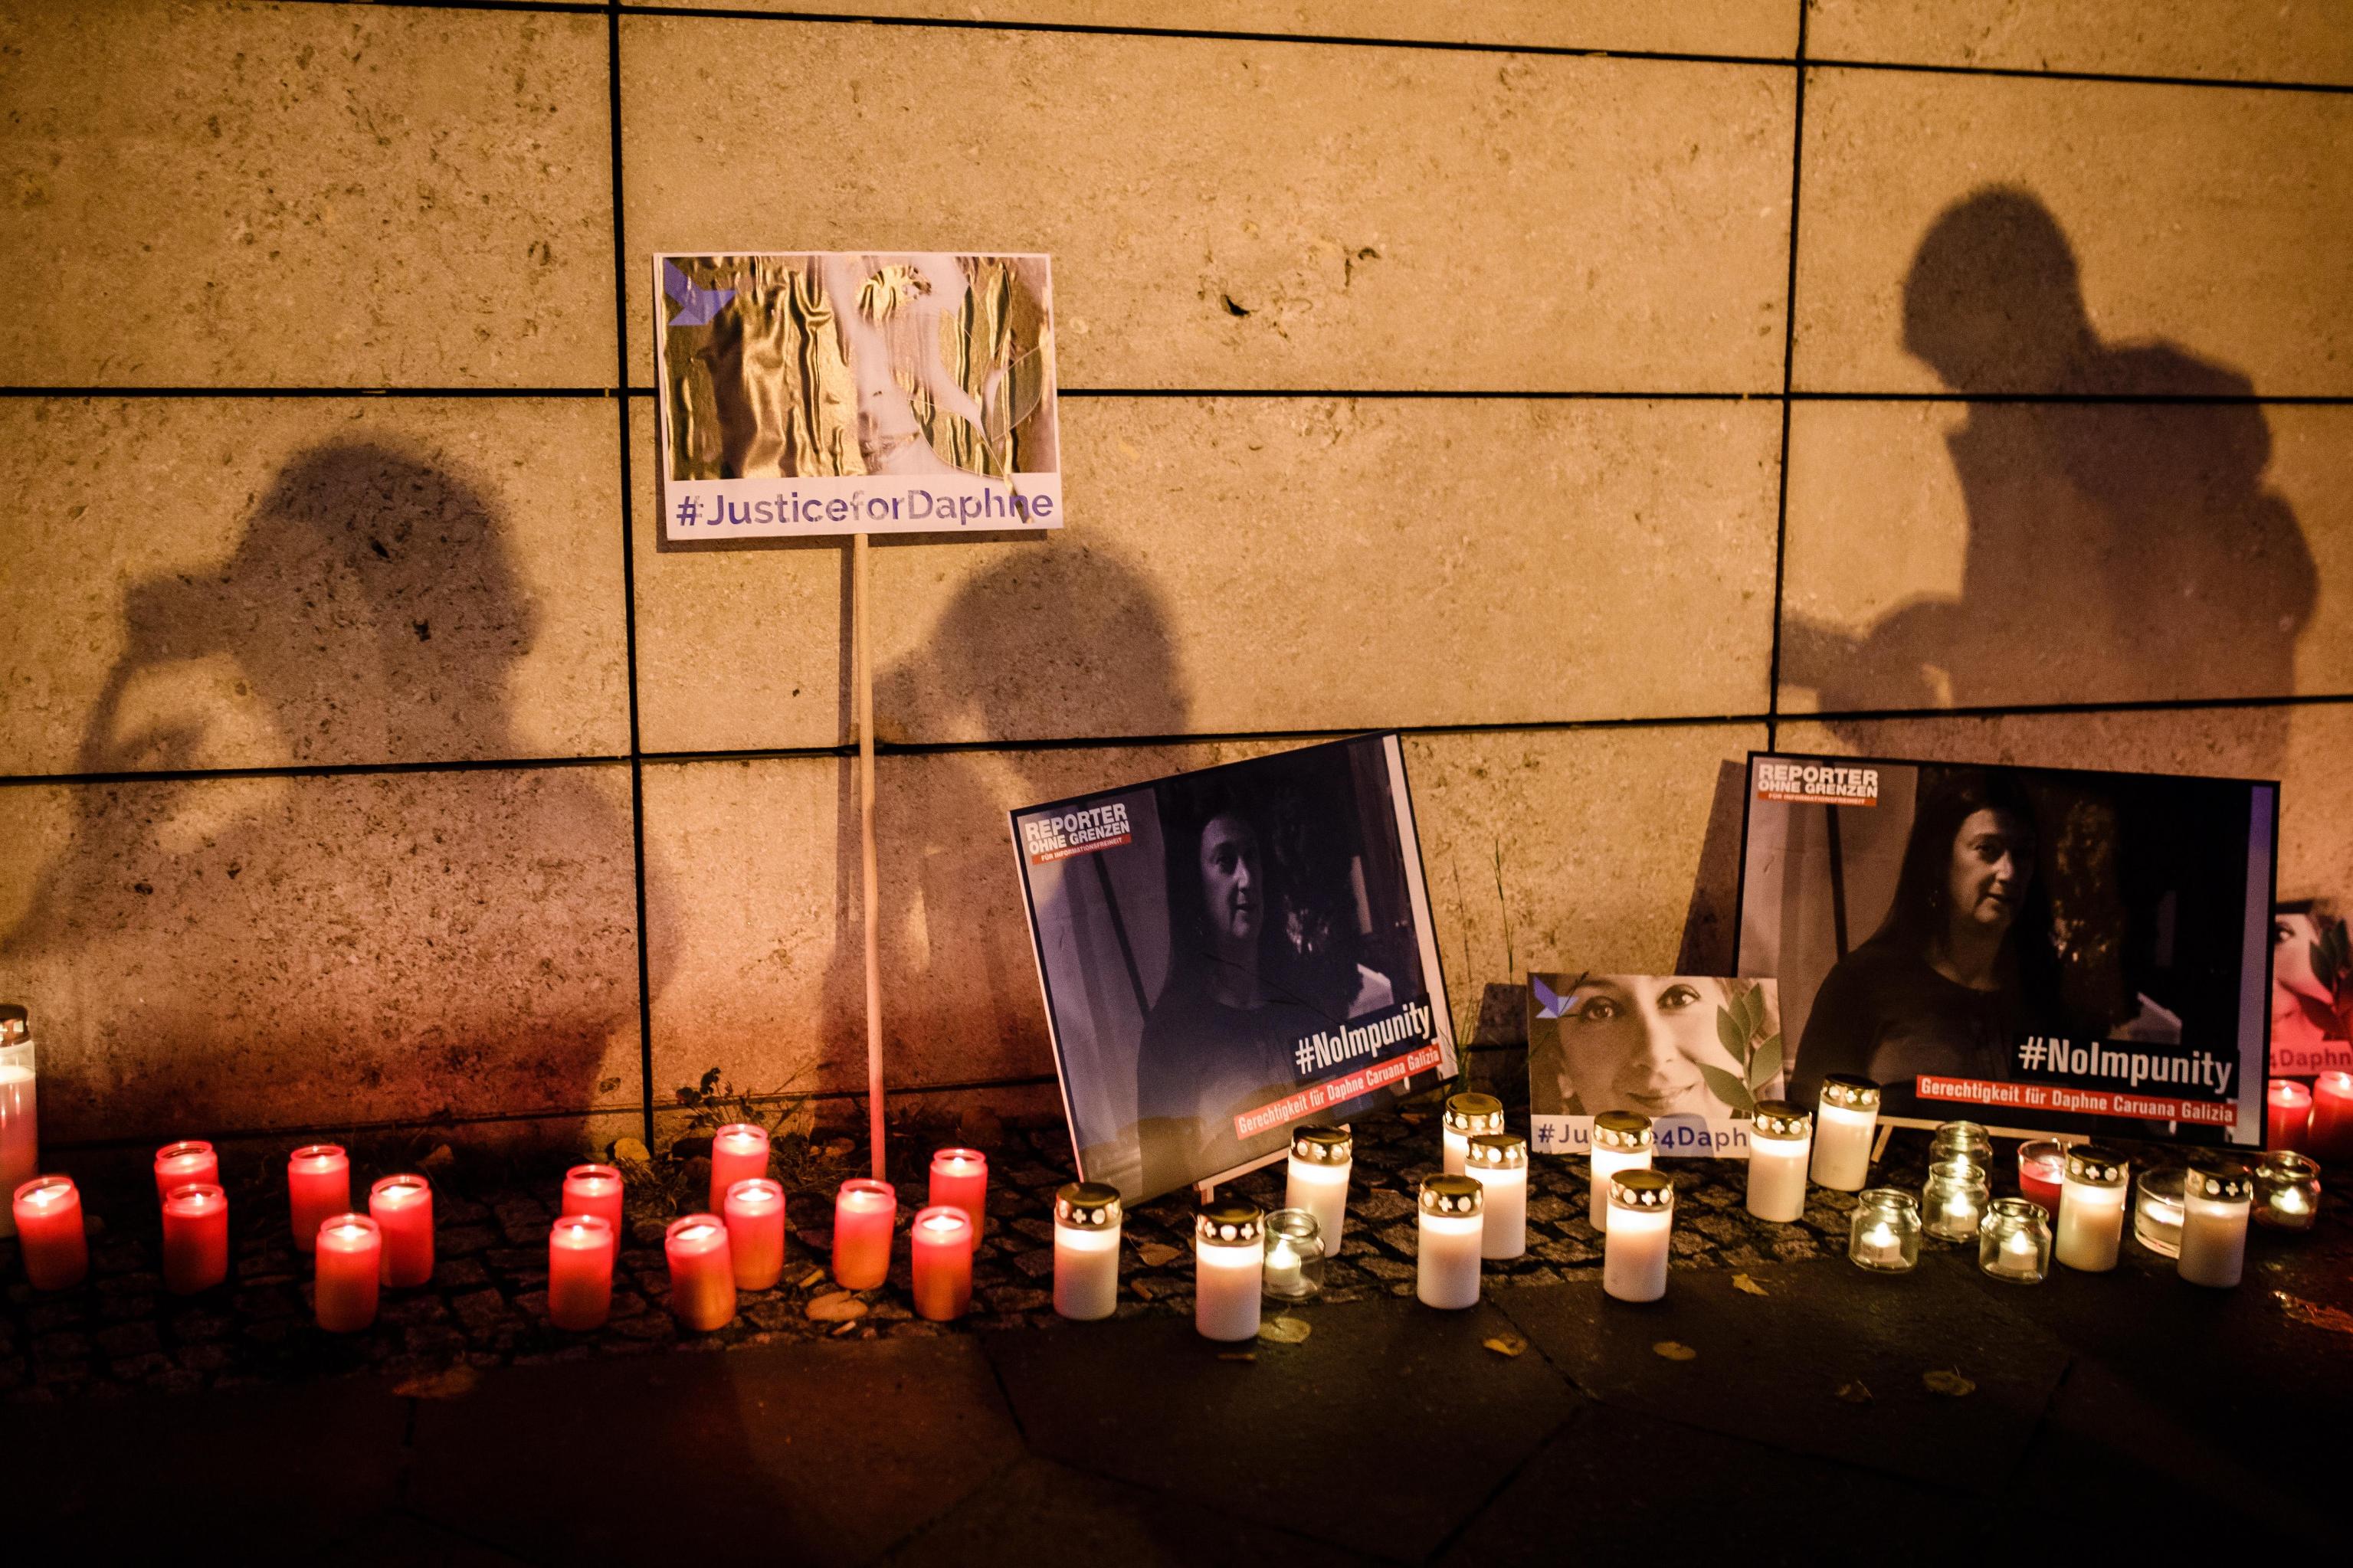 epa07925849 Filming participants cast shadows onto candles and and cardboards with photos during a picket in front of the Maltese embassy for murdered journalist Daphne Caruana Galizia in Berlin, Germany, 16 October 2019. Reporters Without Borders organized a picket for murdered journalist Daphne Caruana Galizia, who was killed on 16 October 2017 in Malta, while investigating the Panama Papers case.  EPA/CLEMENS BILAN